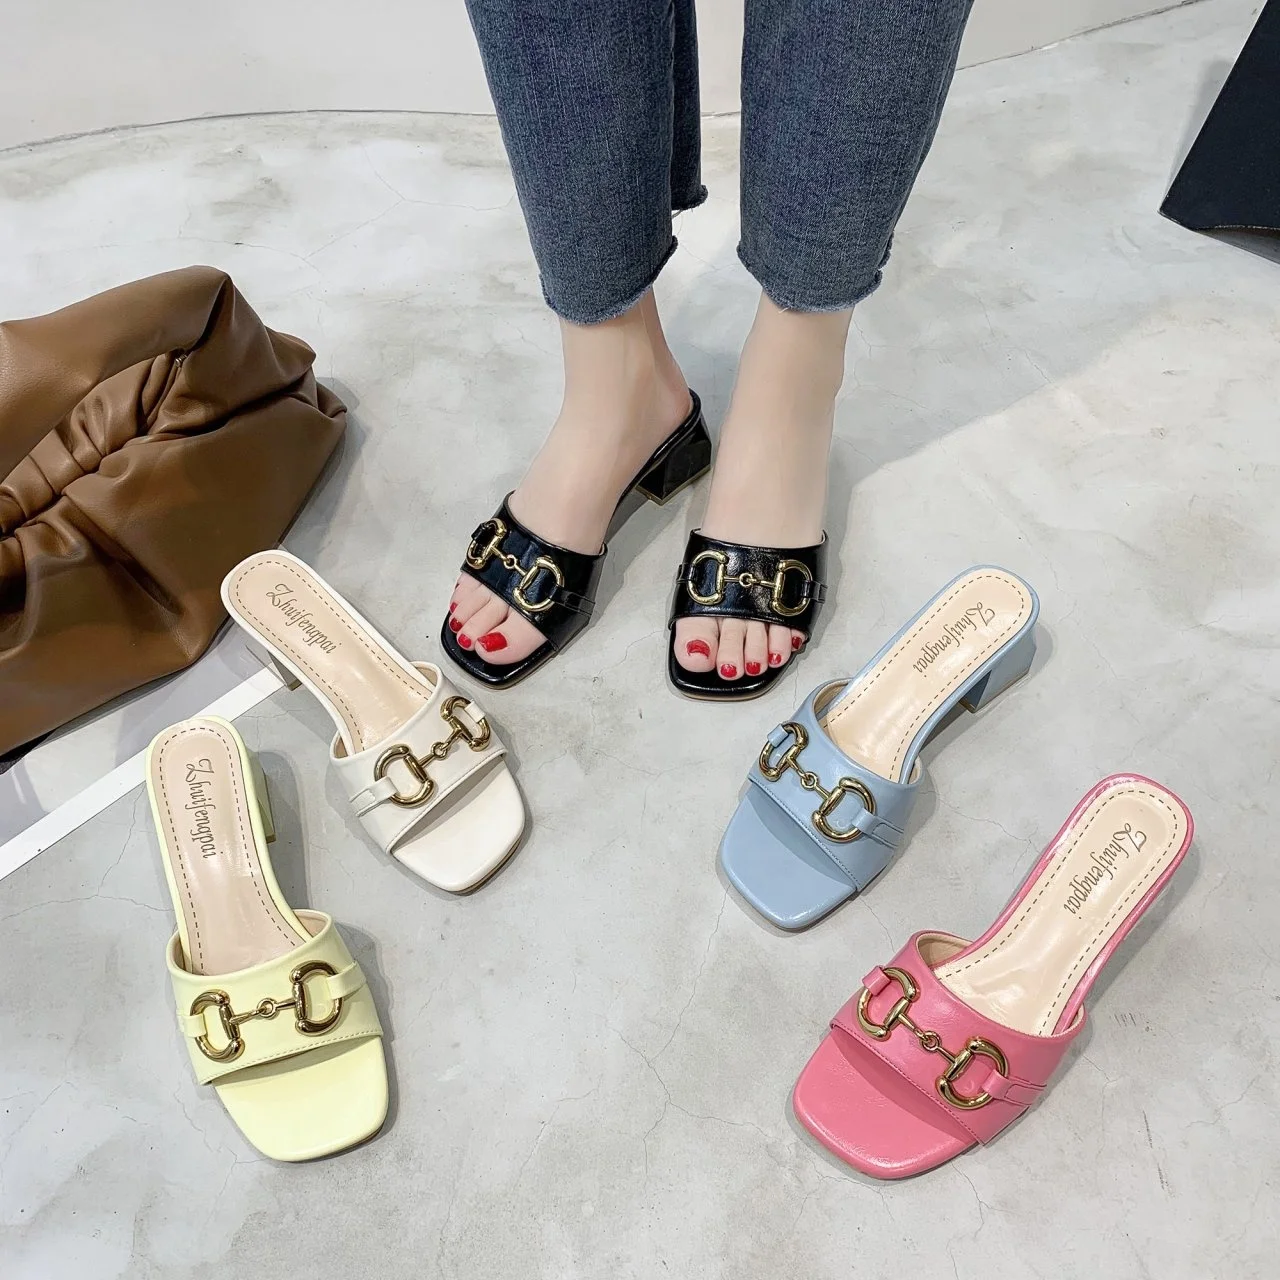 

Weave Outdoor Sandals Slippers Low Heel Flat Slippers Square Head Trend Slippers Heeled Sandals Slides Outside Mules Party Shoes, Brown/white